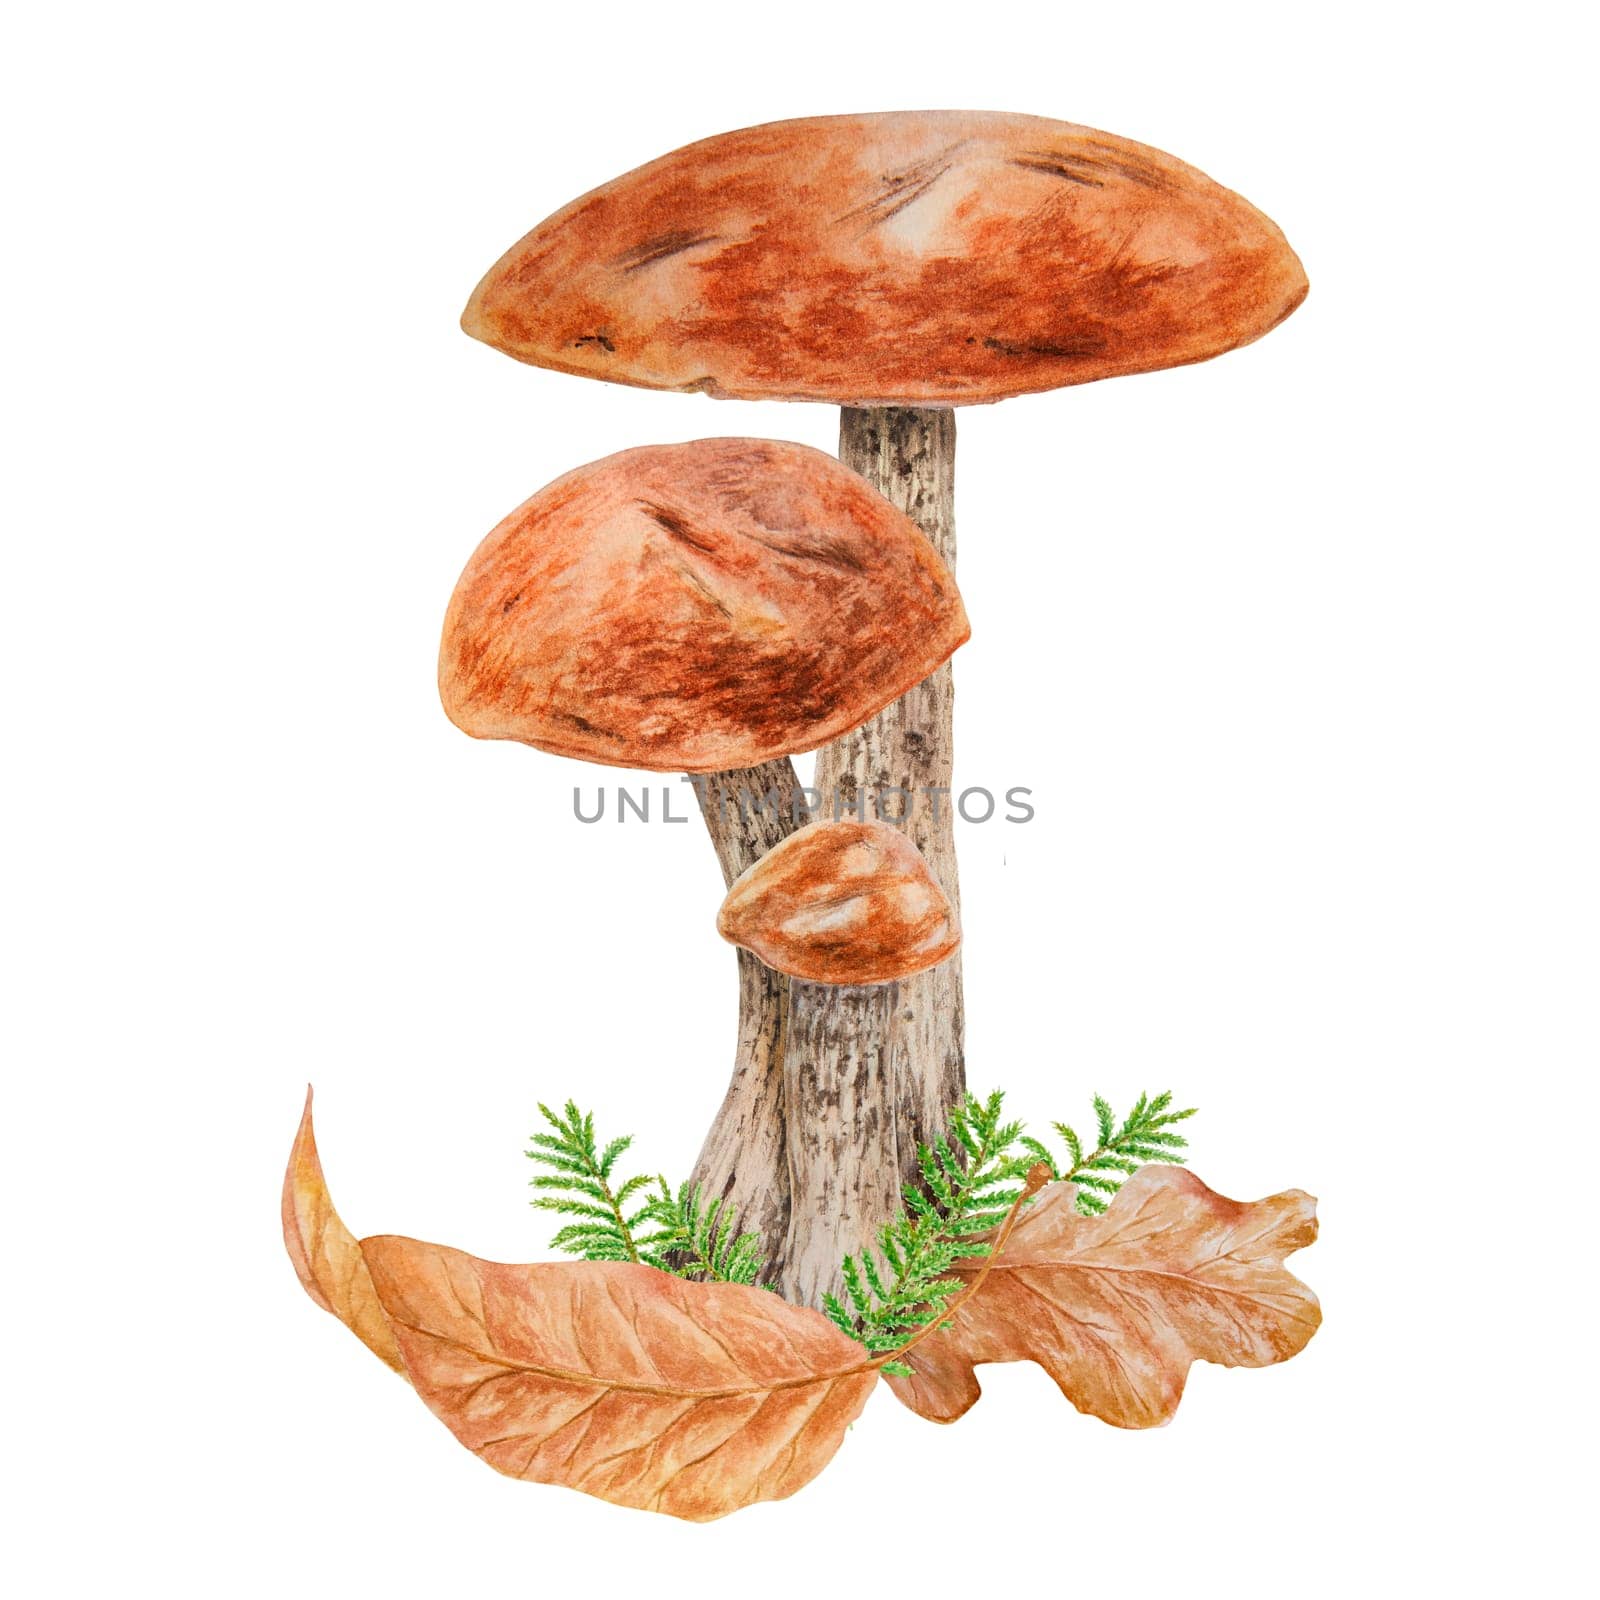 Wild mushroom, dry leaves and moss watercolor hand drawn botanical realistic illustration. Forest edible boletus clip art. Great for printing on fabric, postcards, invitations, menus, farm prints by florainlove_art